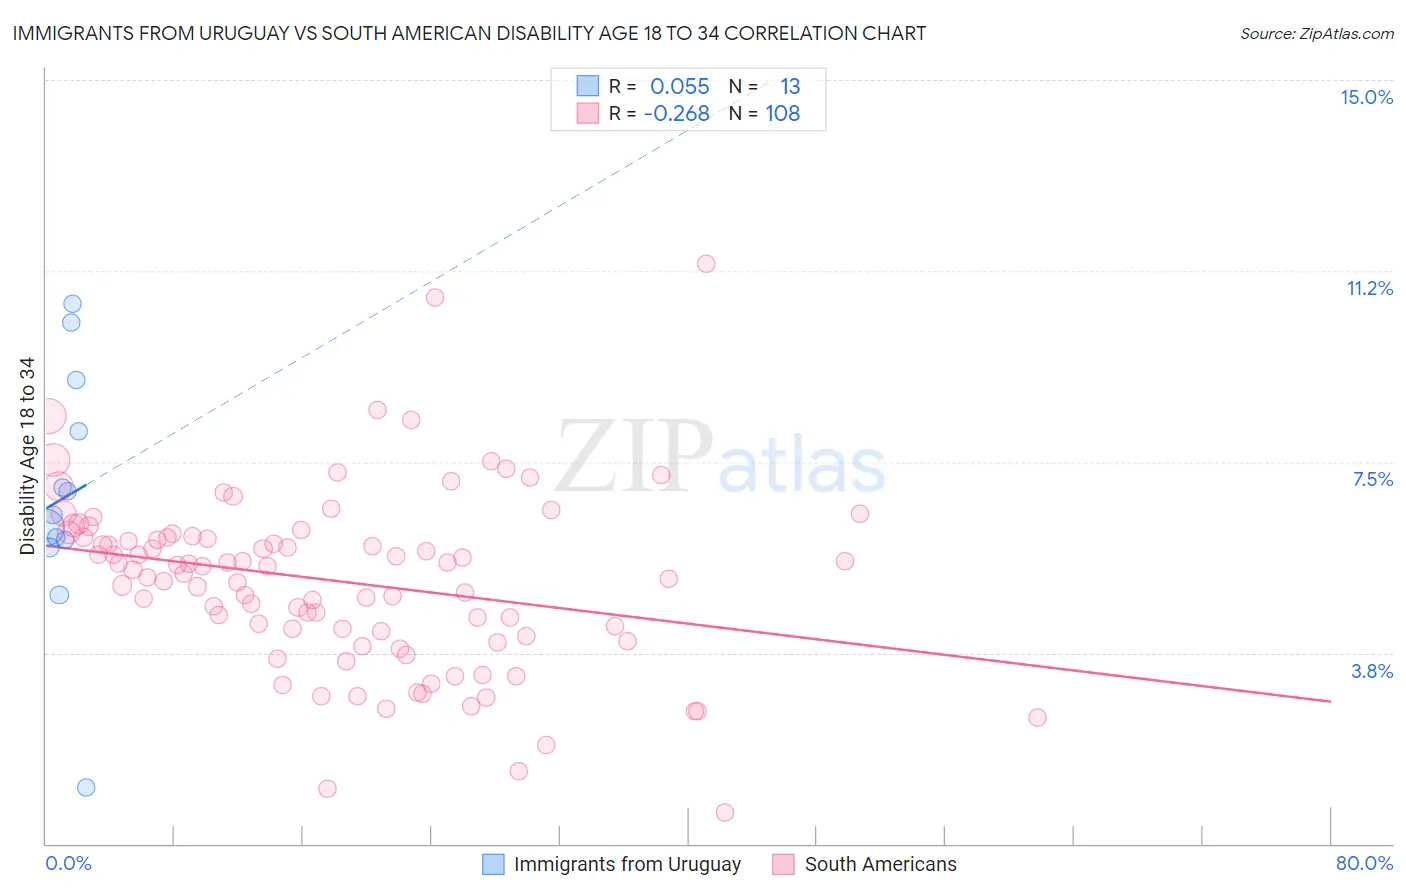 Immigrants from Uruguay vs South American Disability Age 18 to 34